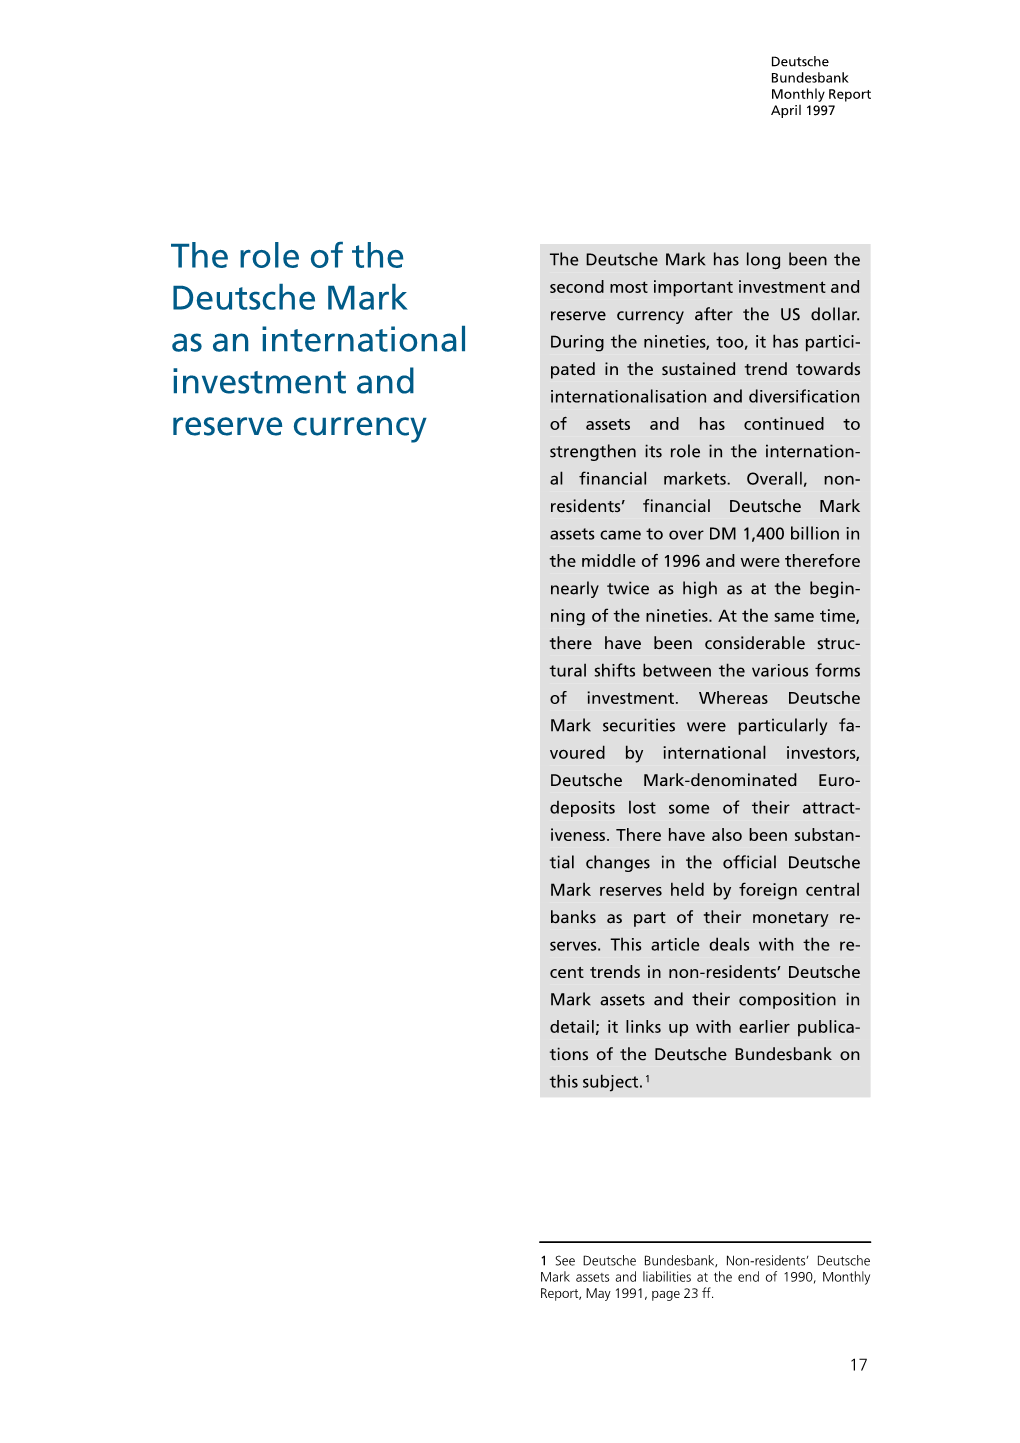 The Role of the Deutsche Mark As an International Investment And